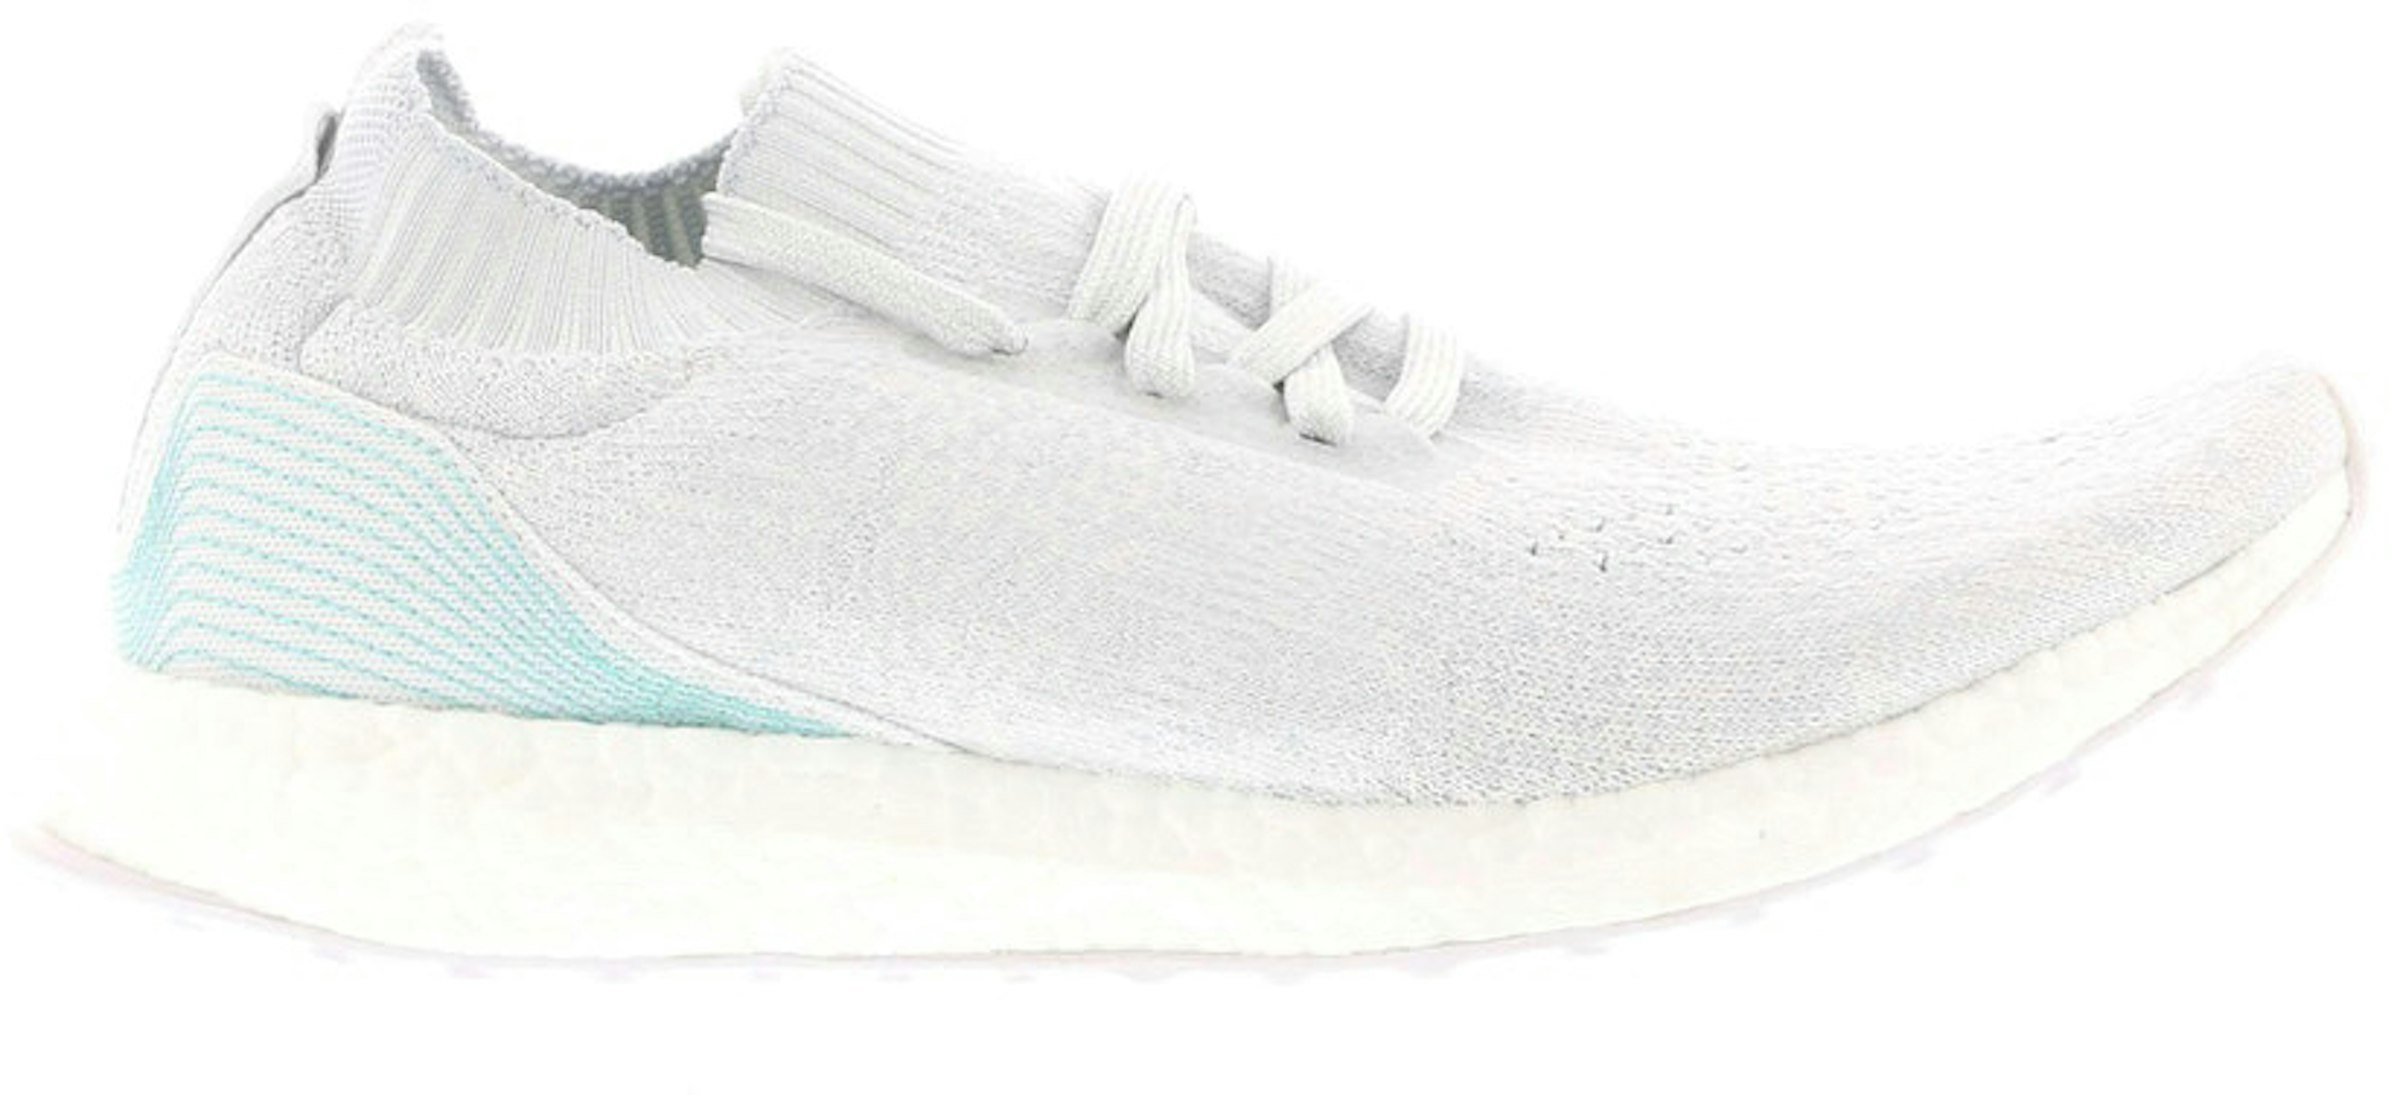 adidas Ultra Boost Uncaged Parley - - US